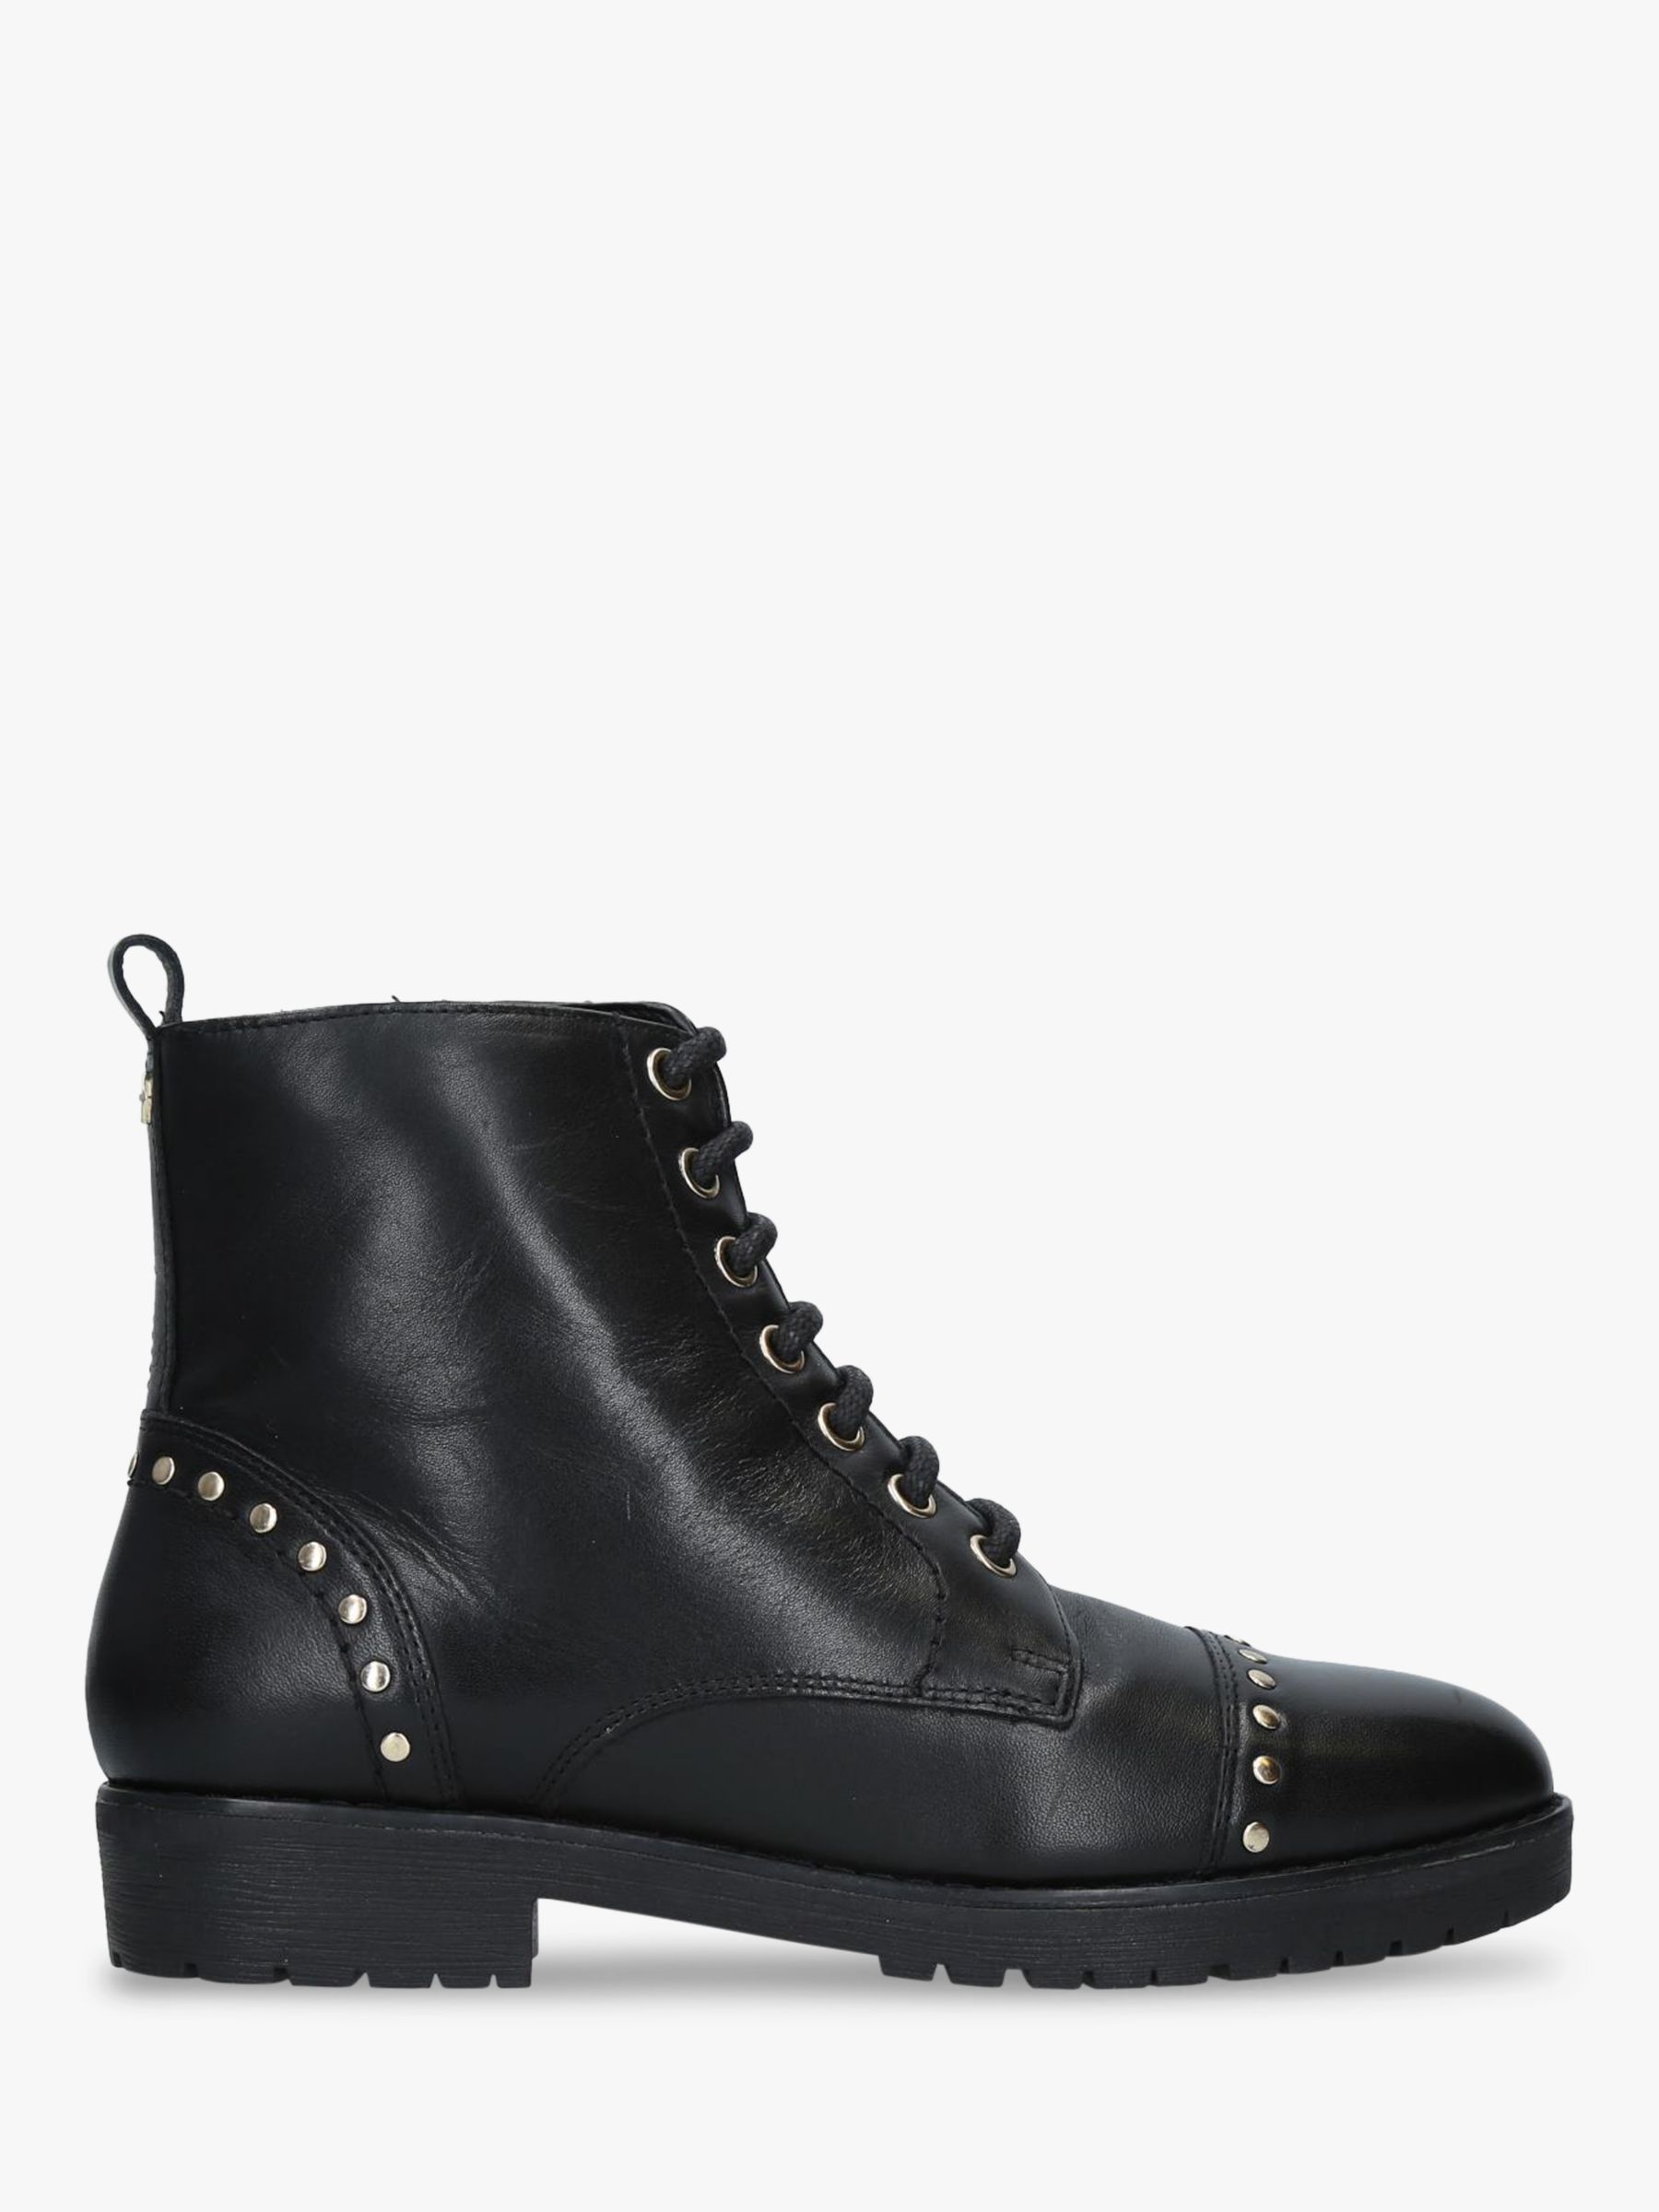 Carvela Steady Stud Lace Up Ankle Boots, Black Leather at John Lewis ...